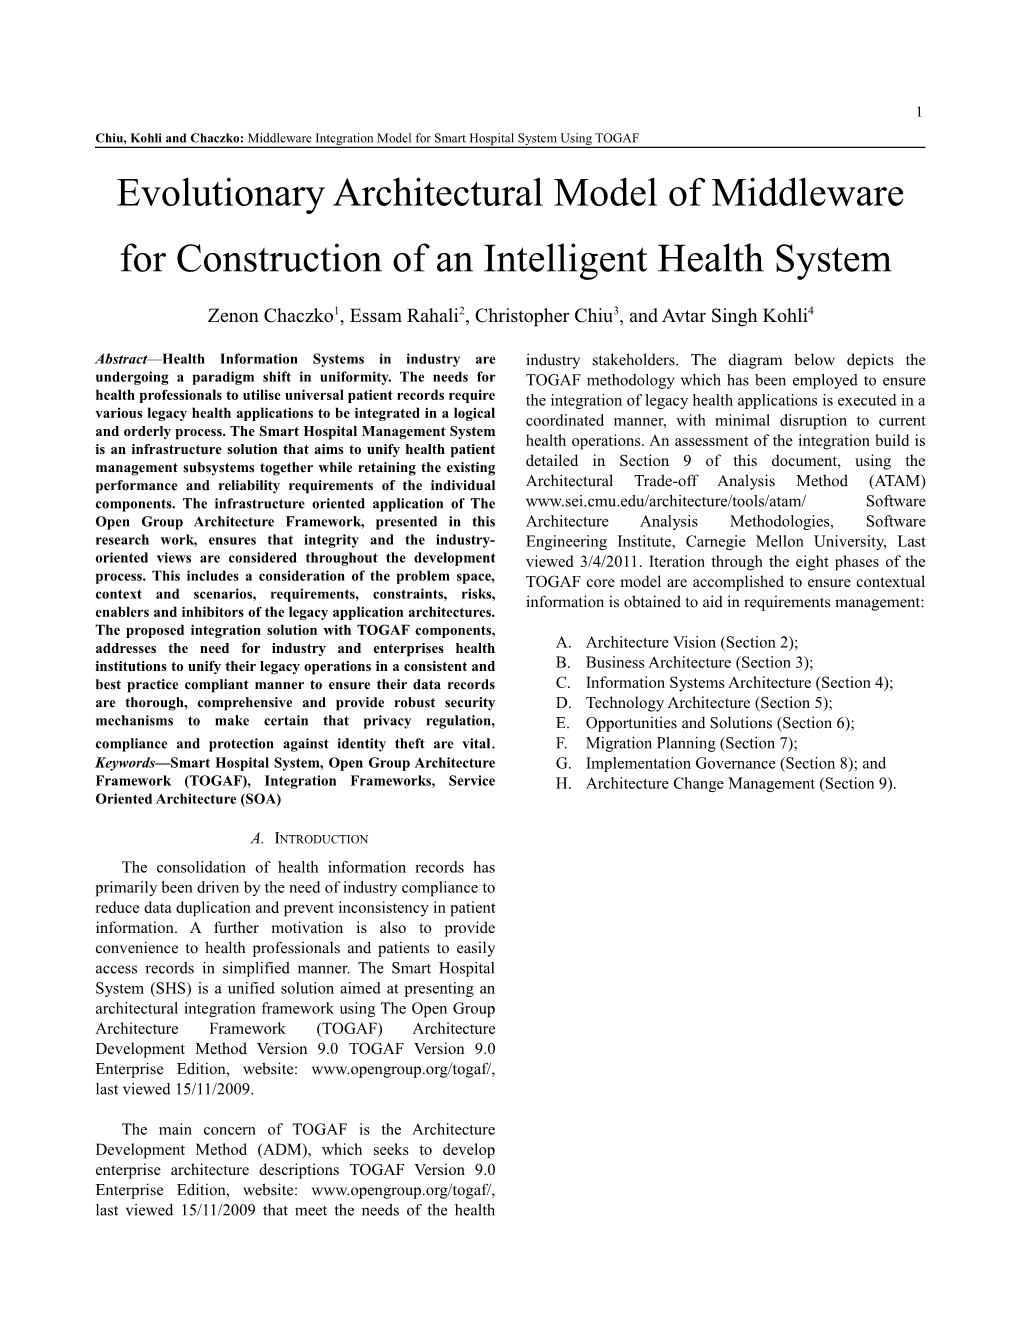 Evolutionary Architectural Model of Middleware